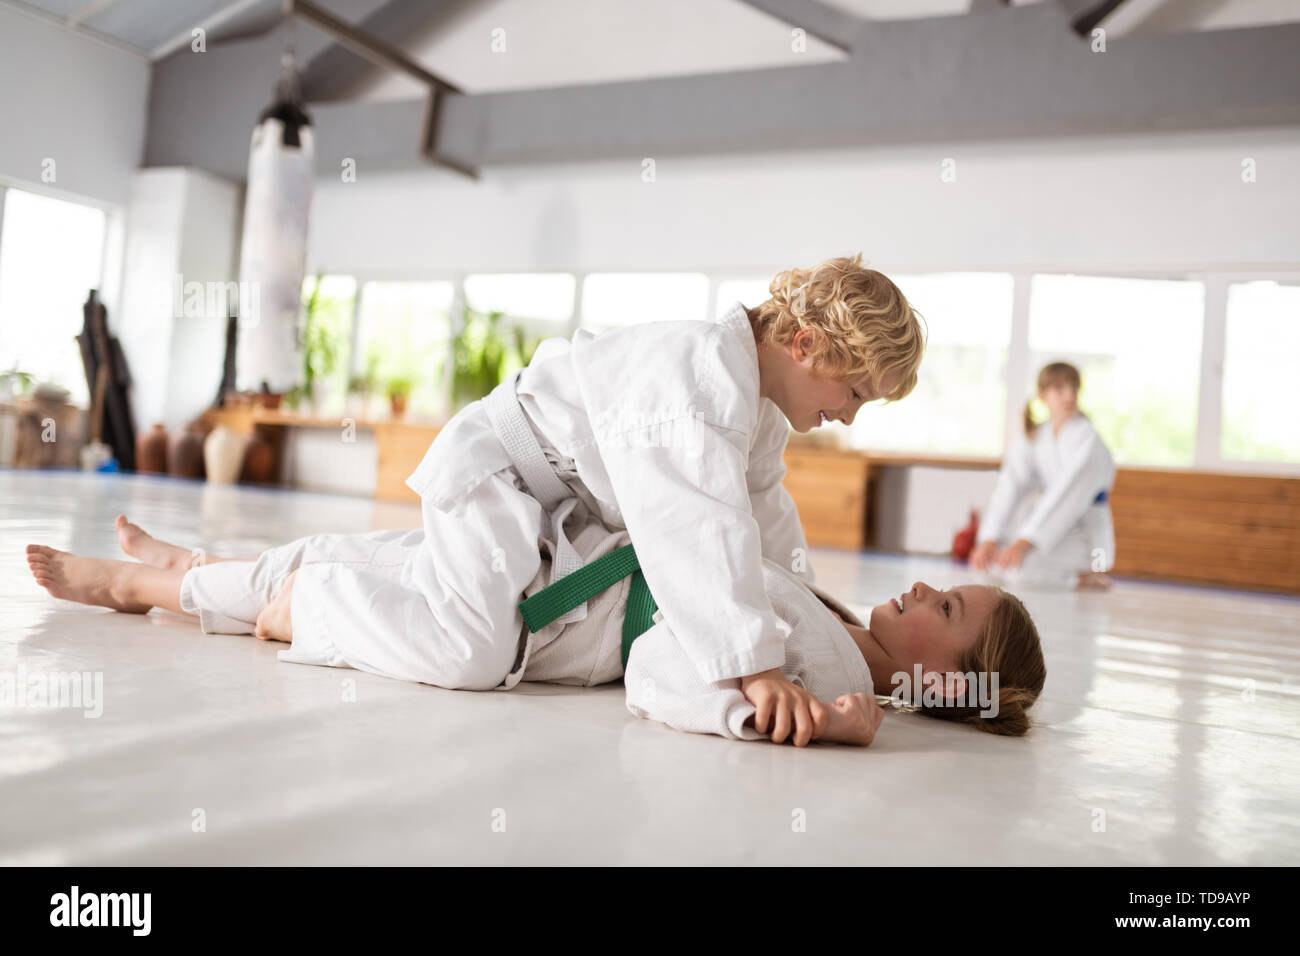 Boy winning. Blonde-haired boy sitting on girl after winning aikido fight with her Stock Photo